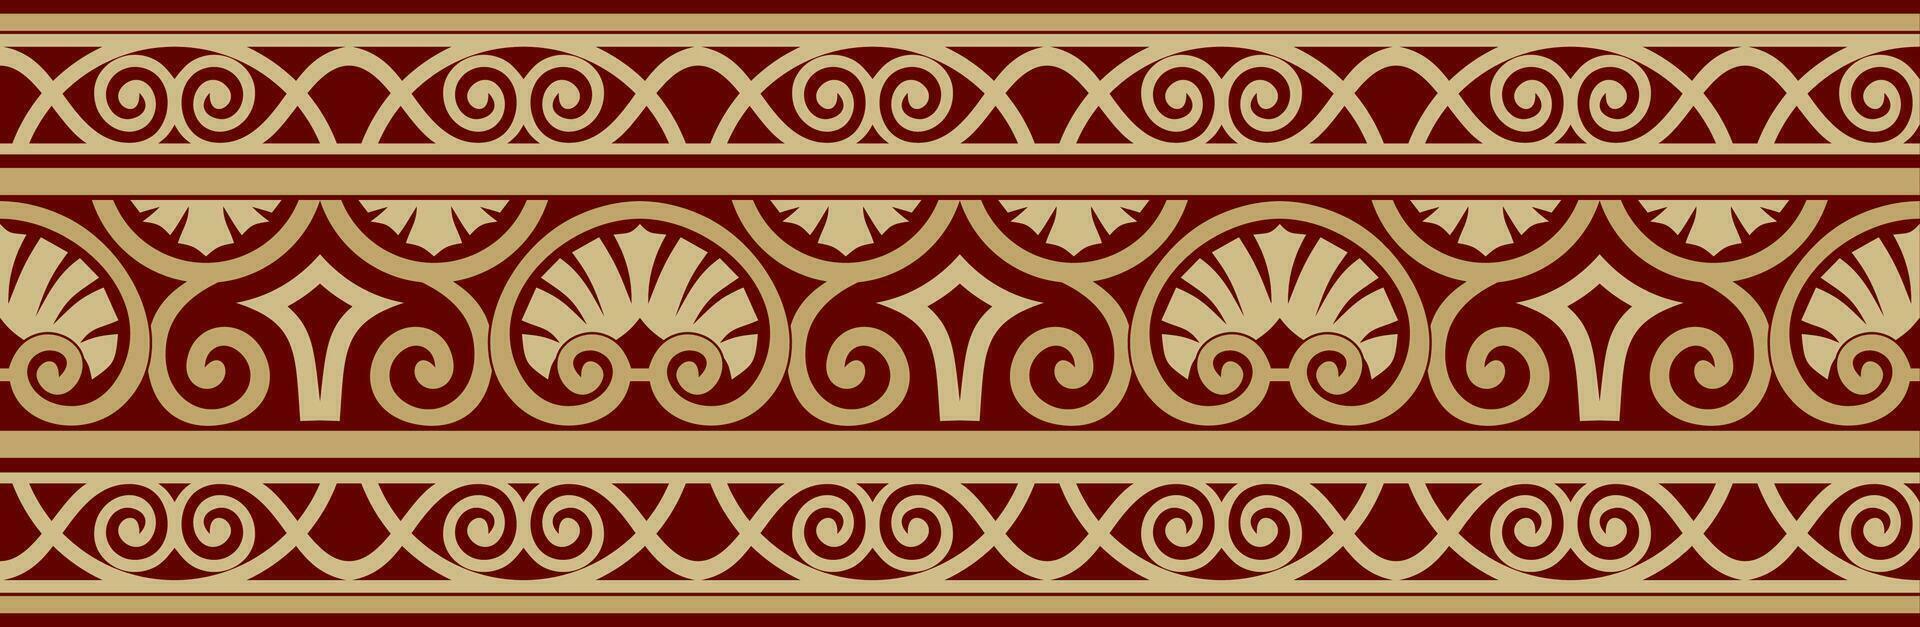 Vector gold and red seamless classic renaissance ornament. Endless european border, revival style frame